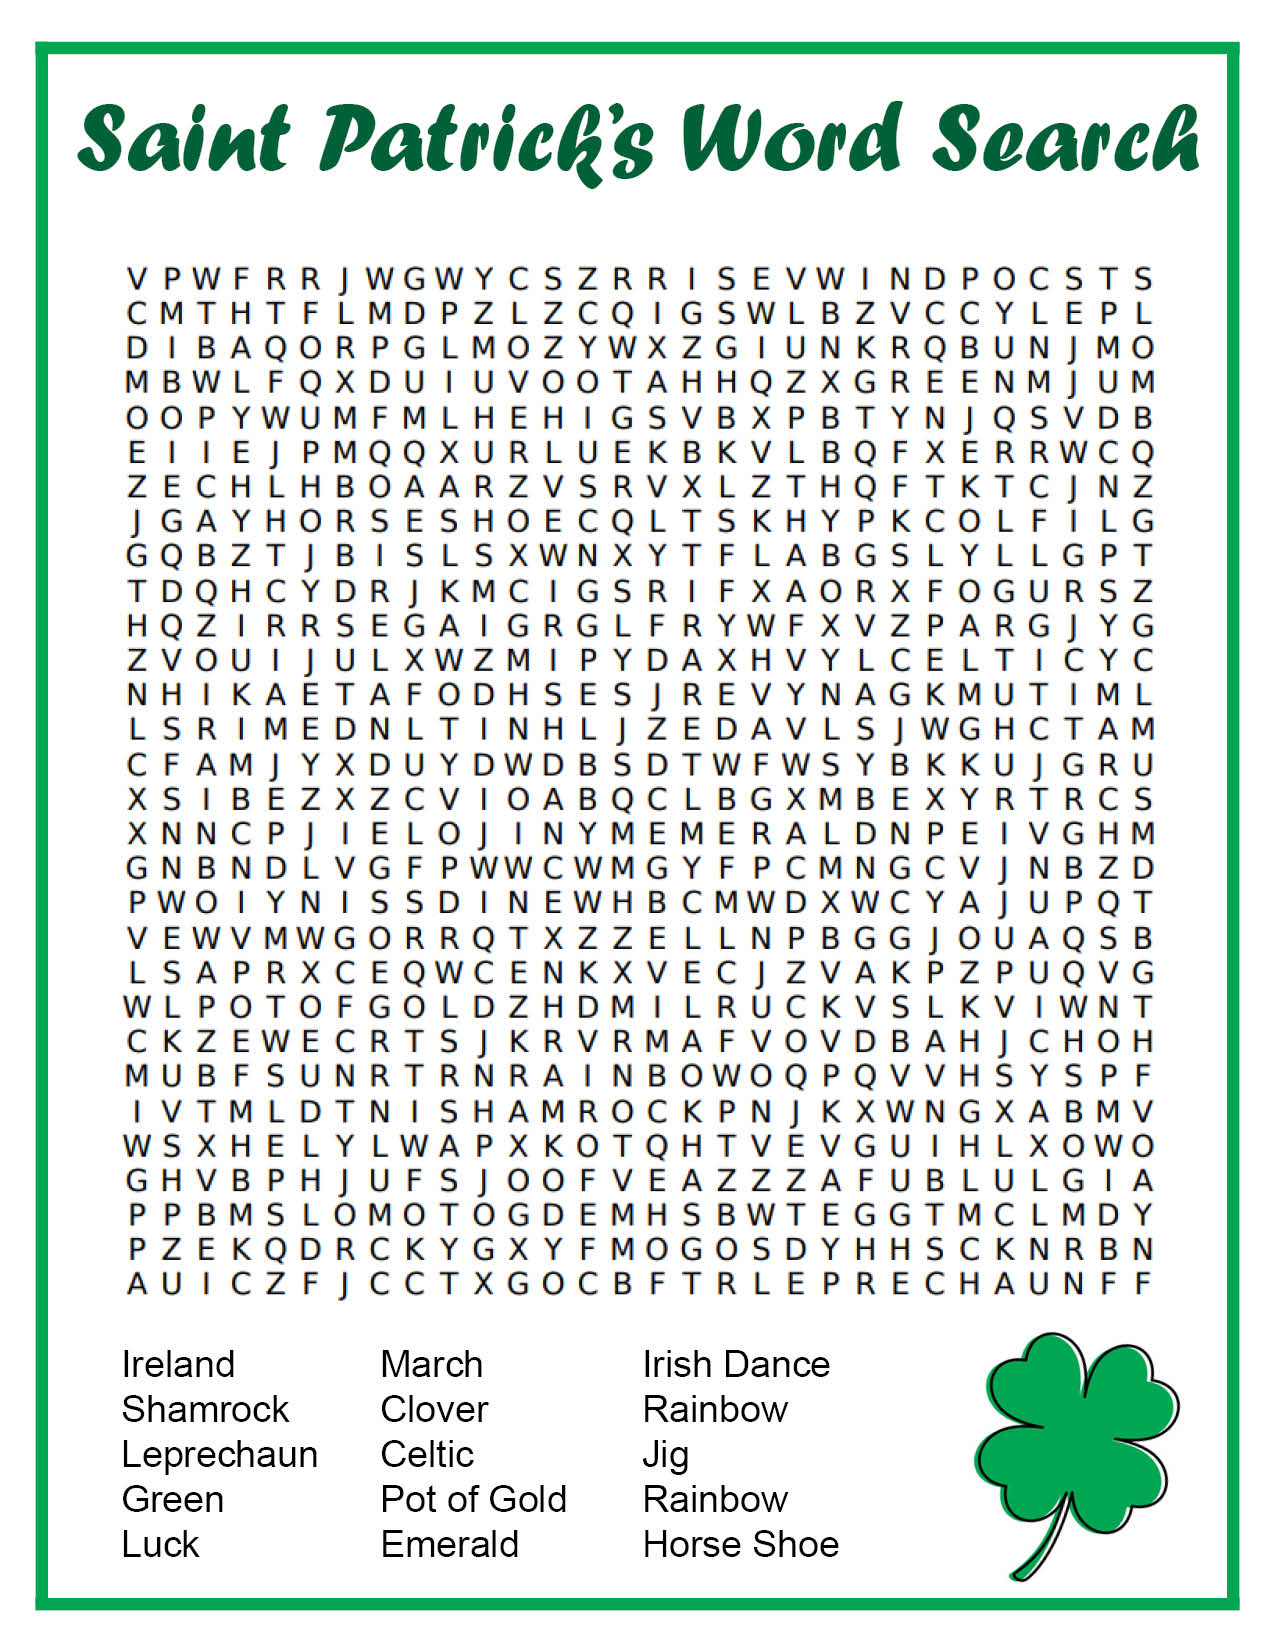 St. Patrick’s Day Word Search